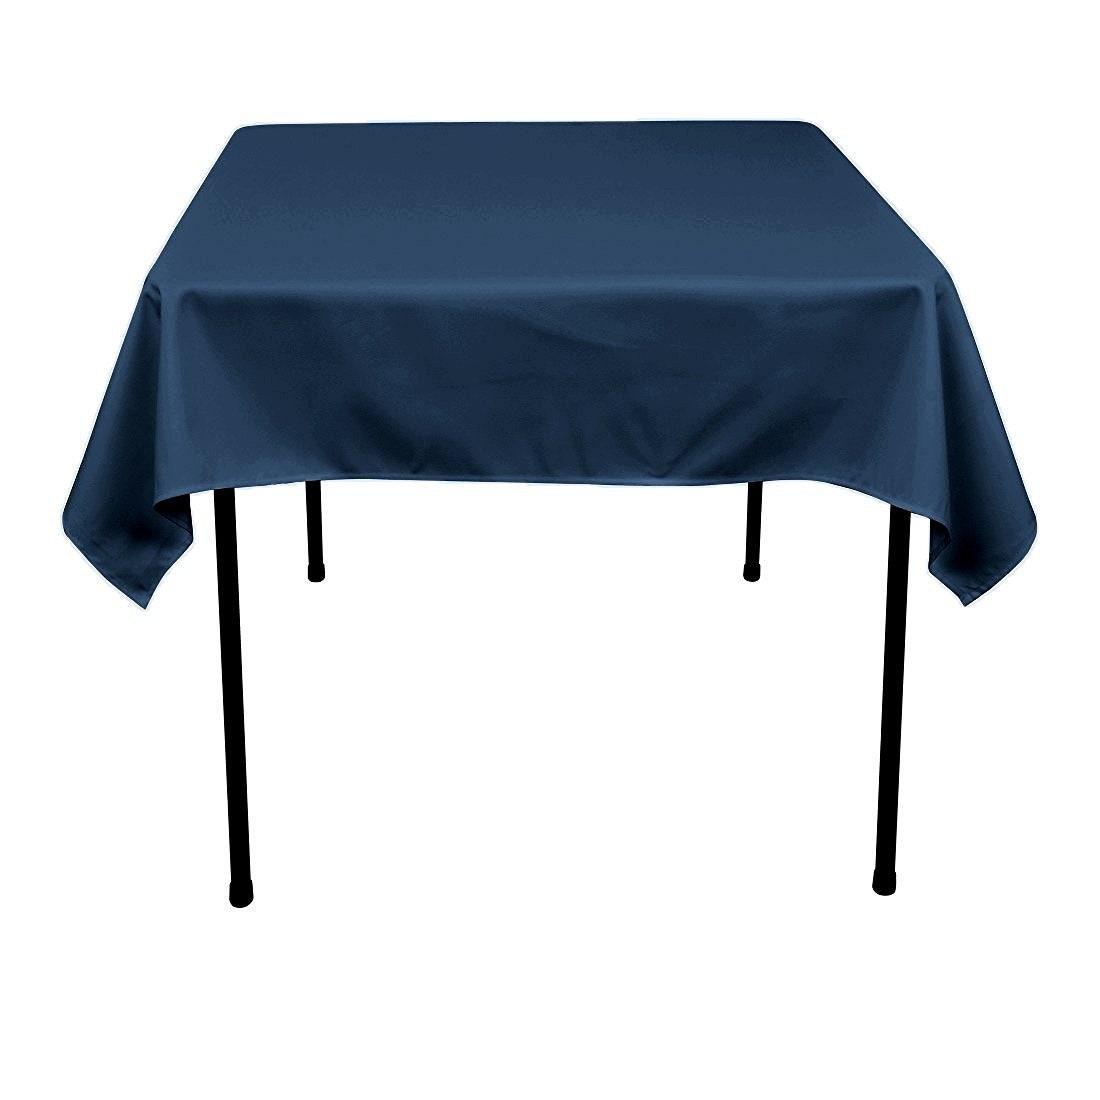 54 x 54-Inch Seamless Navy Blue Rectangular Polyester Tablecloth for Wedding Party Decorations Square Table Cloth Cover